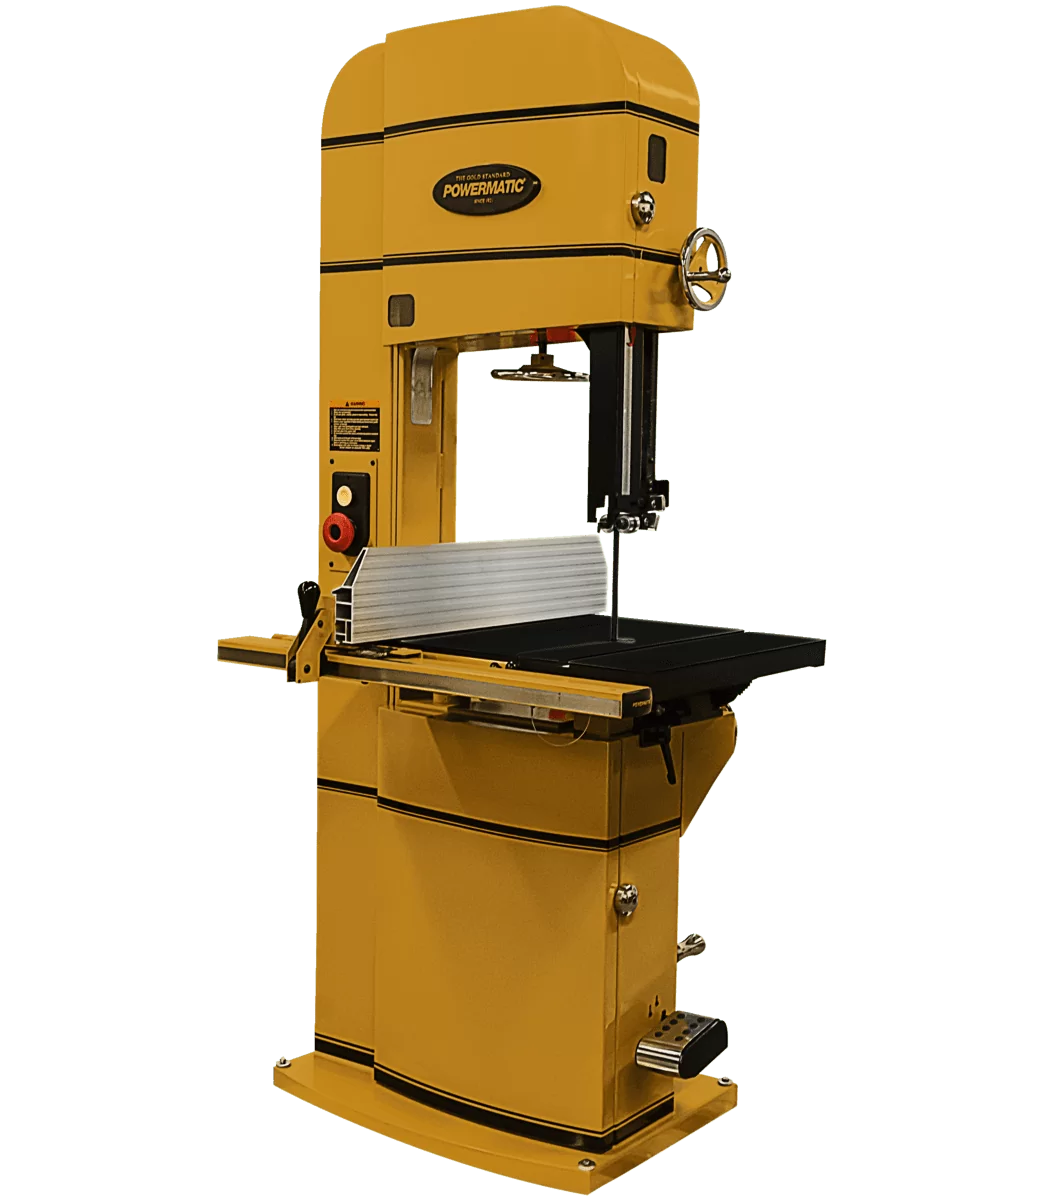 POWERMATIC PM1800BT, 18" Wood Working Band Saw w/ ArmorGlide, 5HP, 1PH, 230V